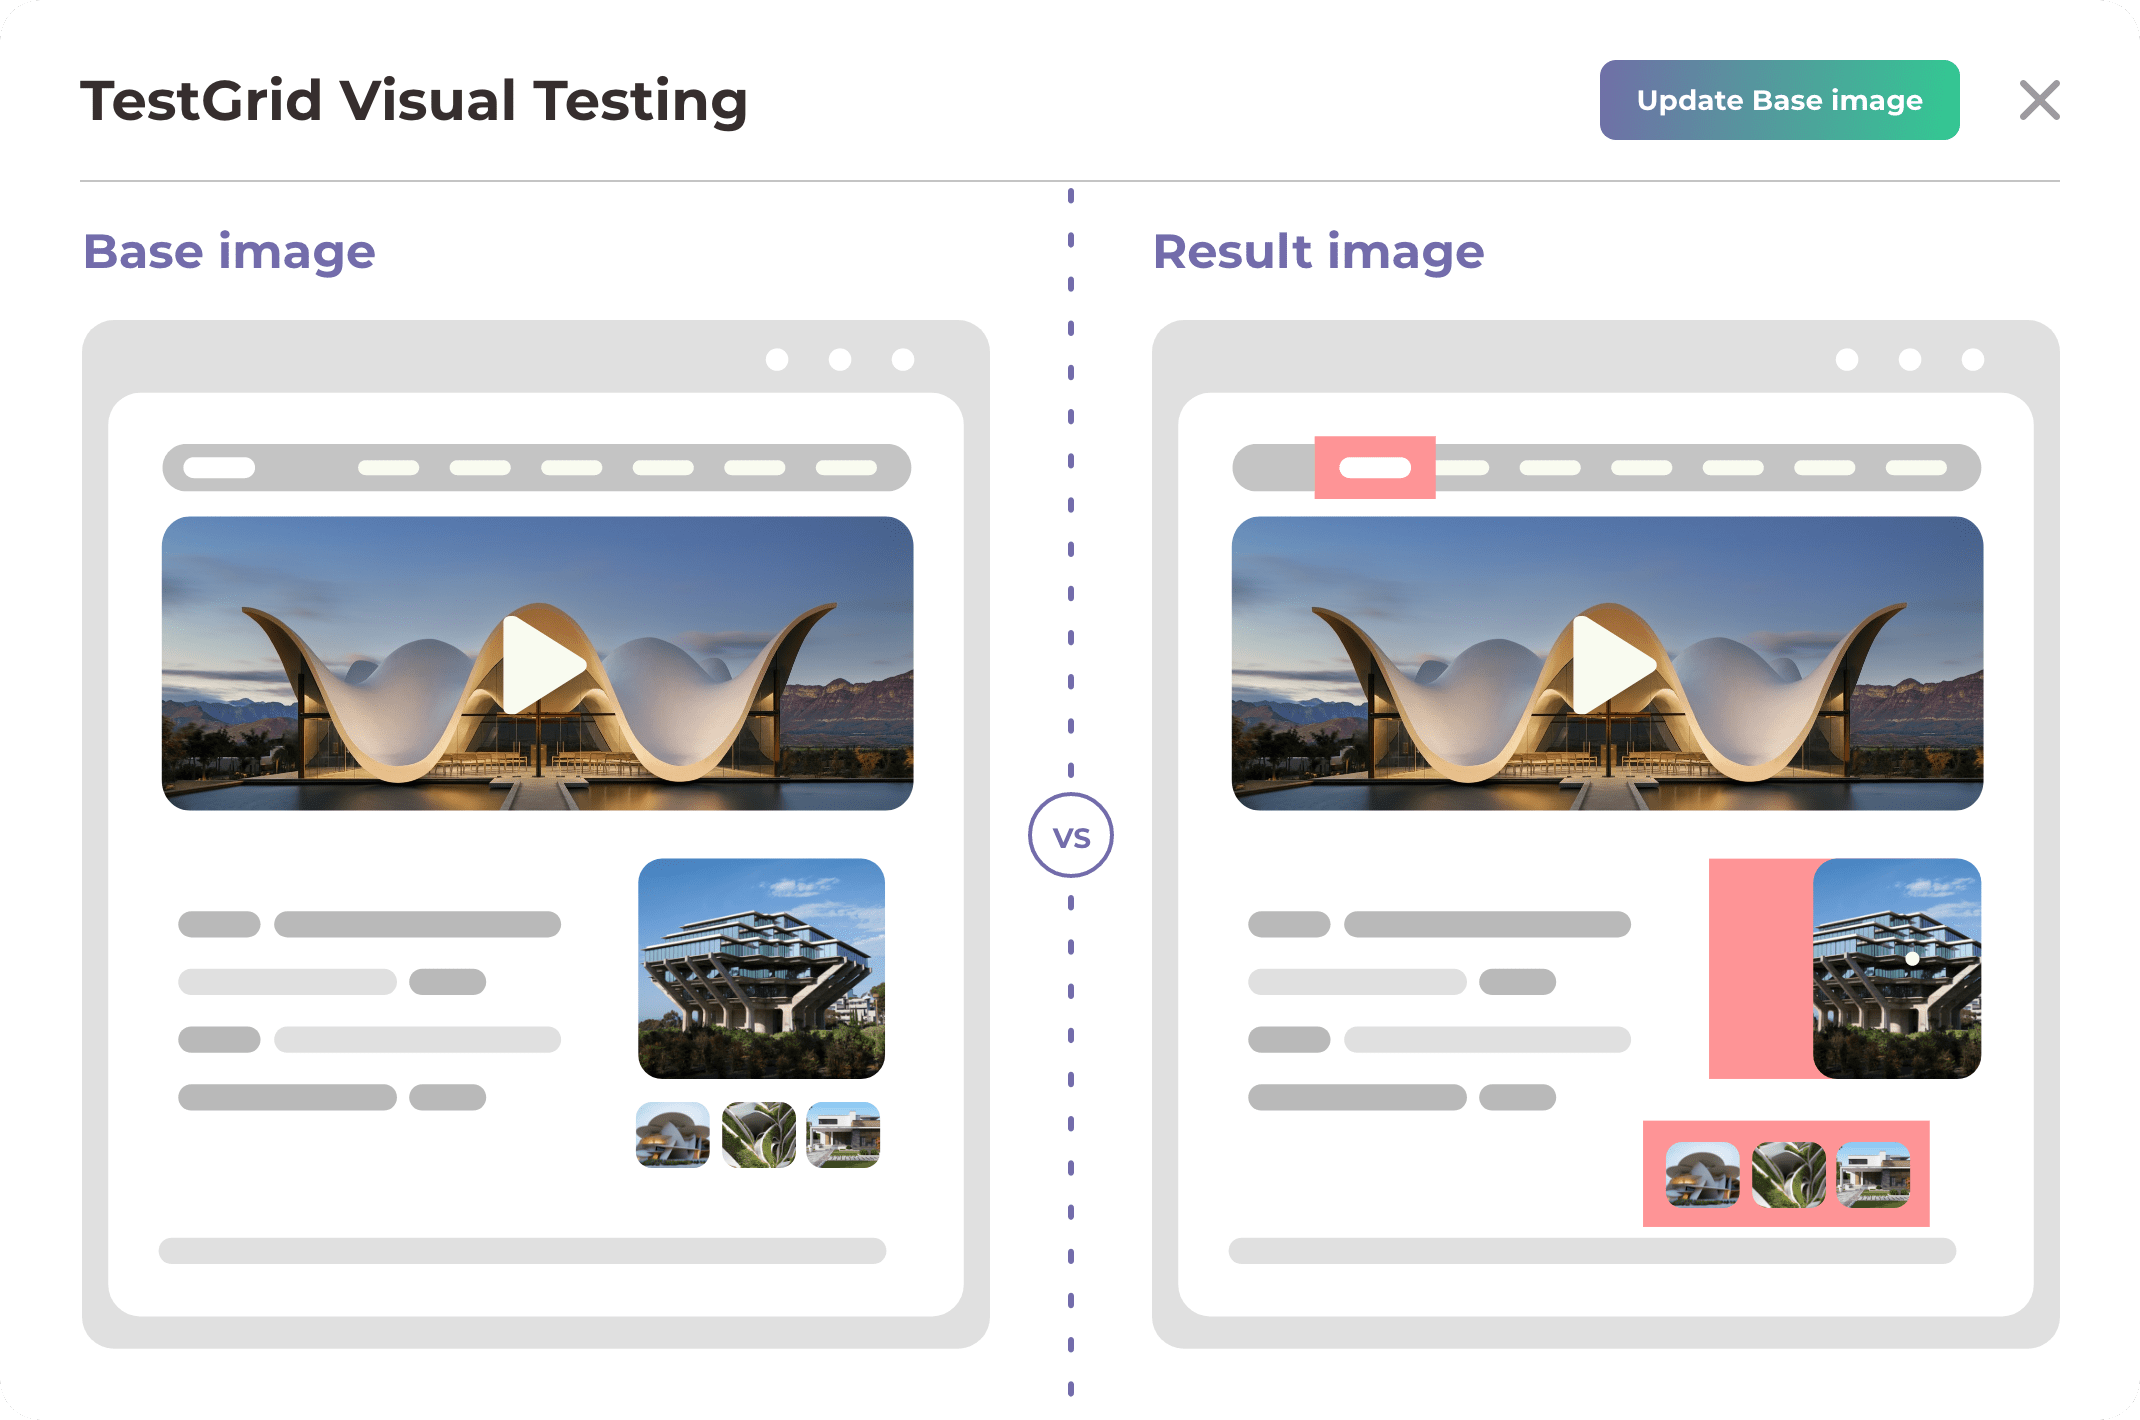 Graphic illustration of visual testing with TestGrid